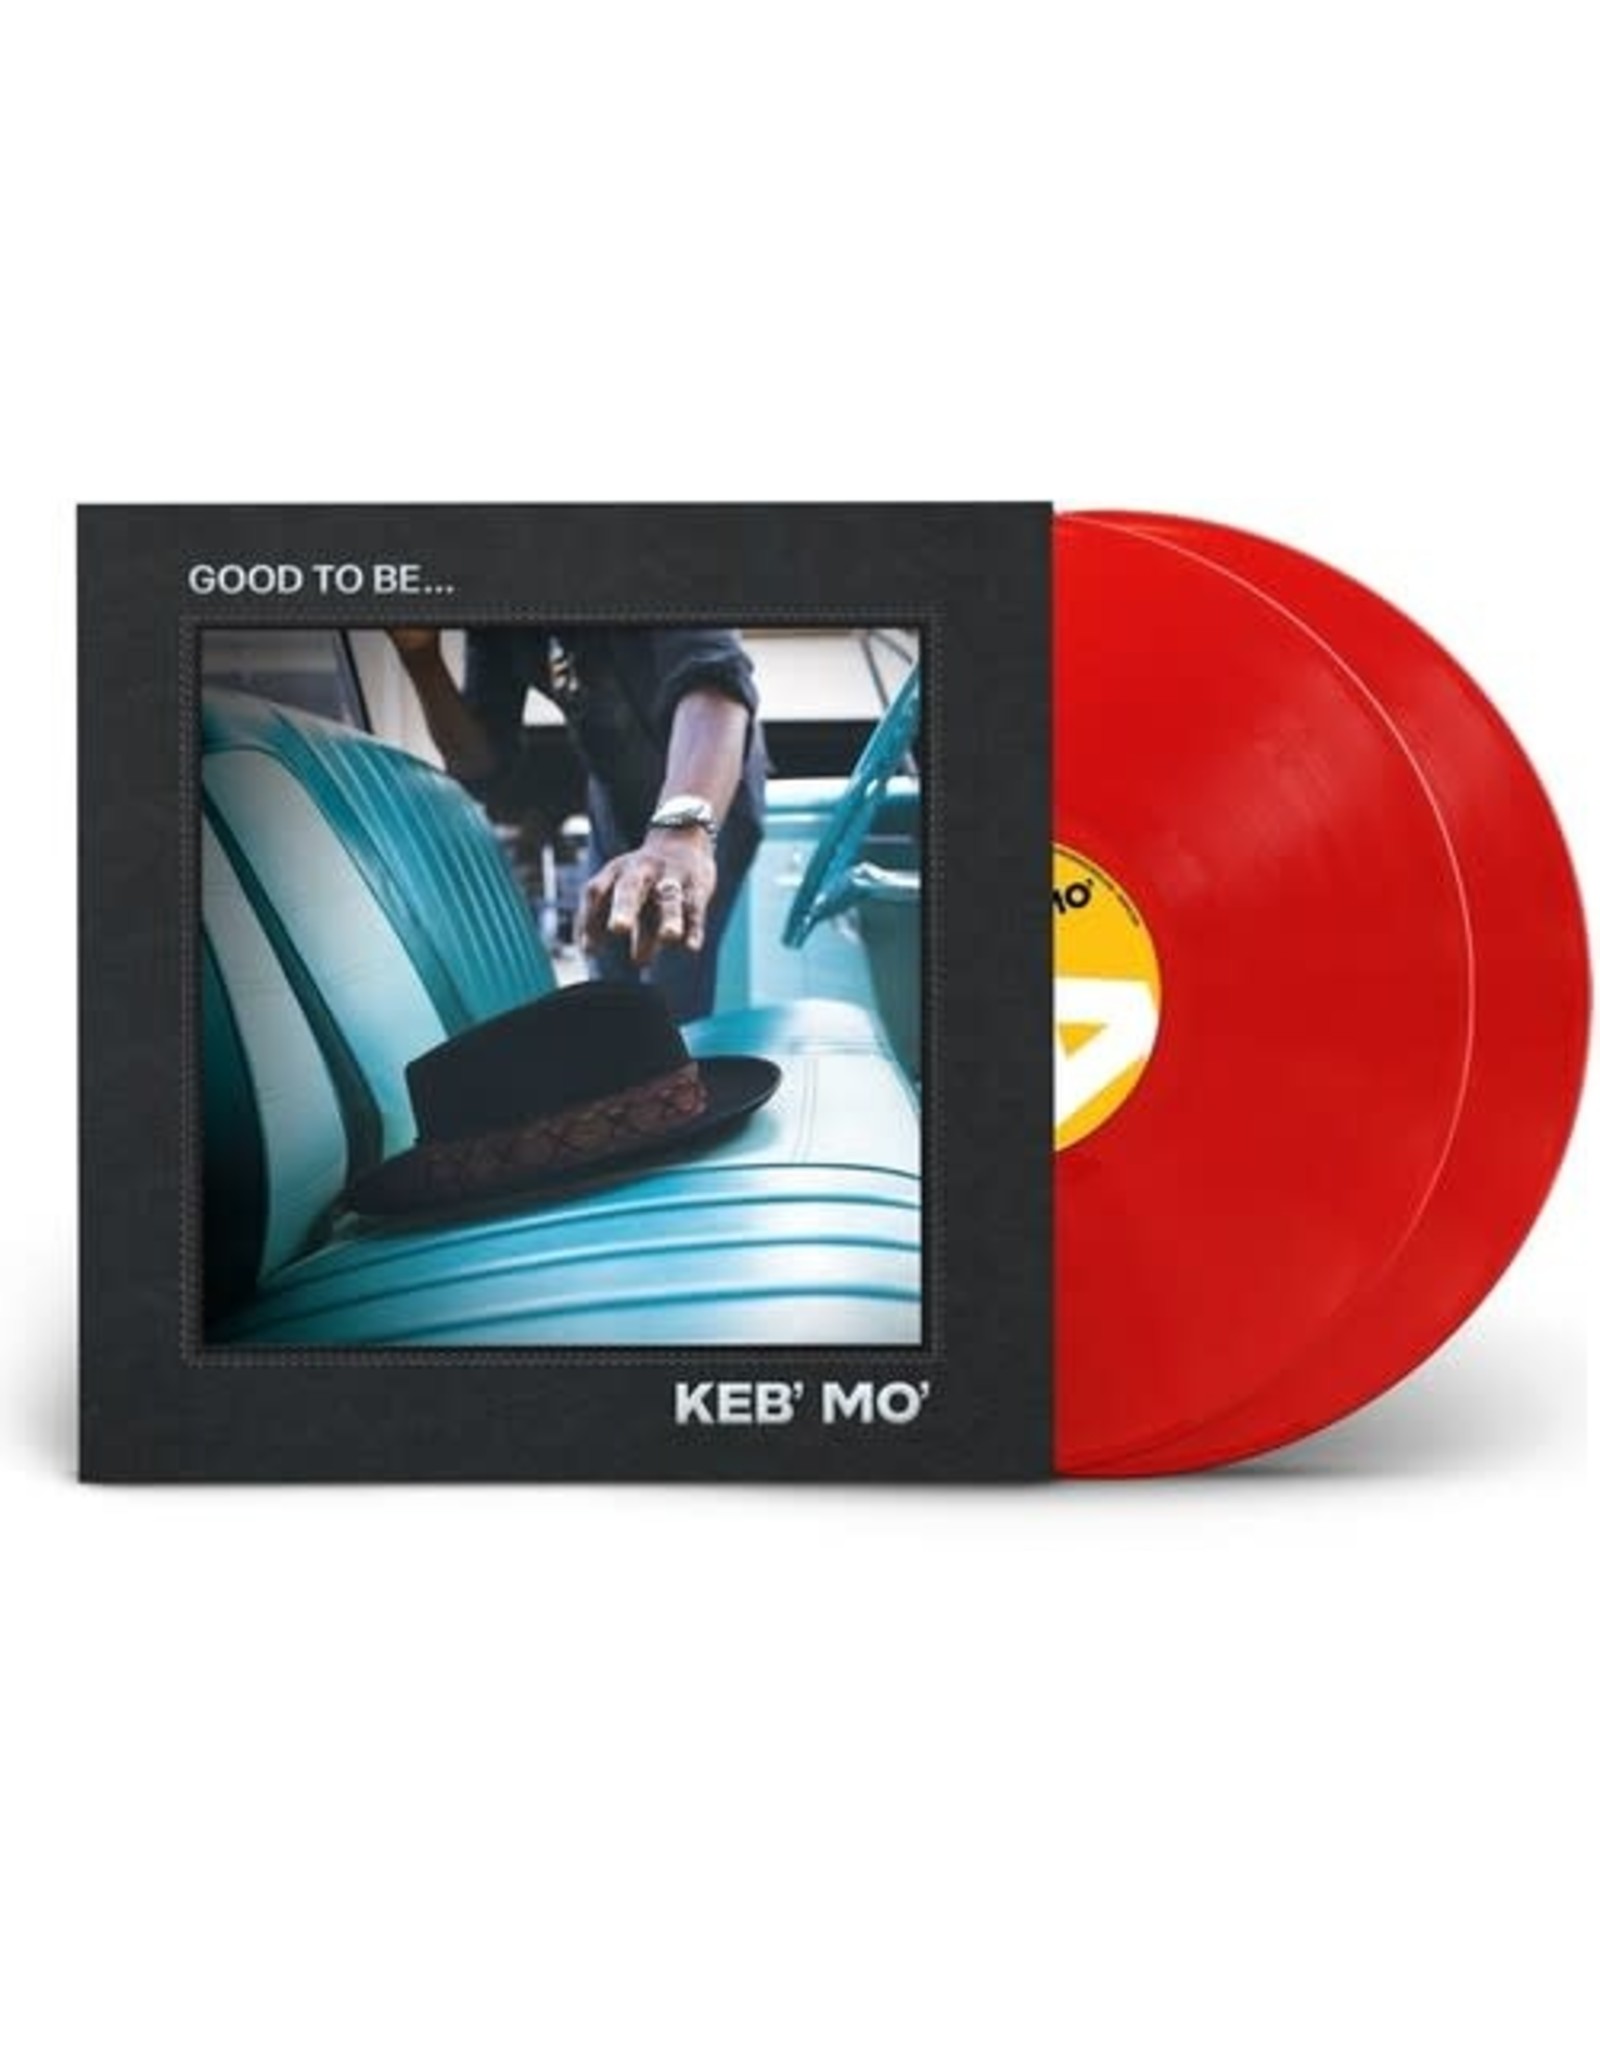 New Vinyl Keb' Mo - Good To Be... (IEX, Clear Red) 2LP